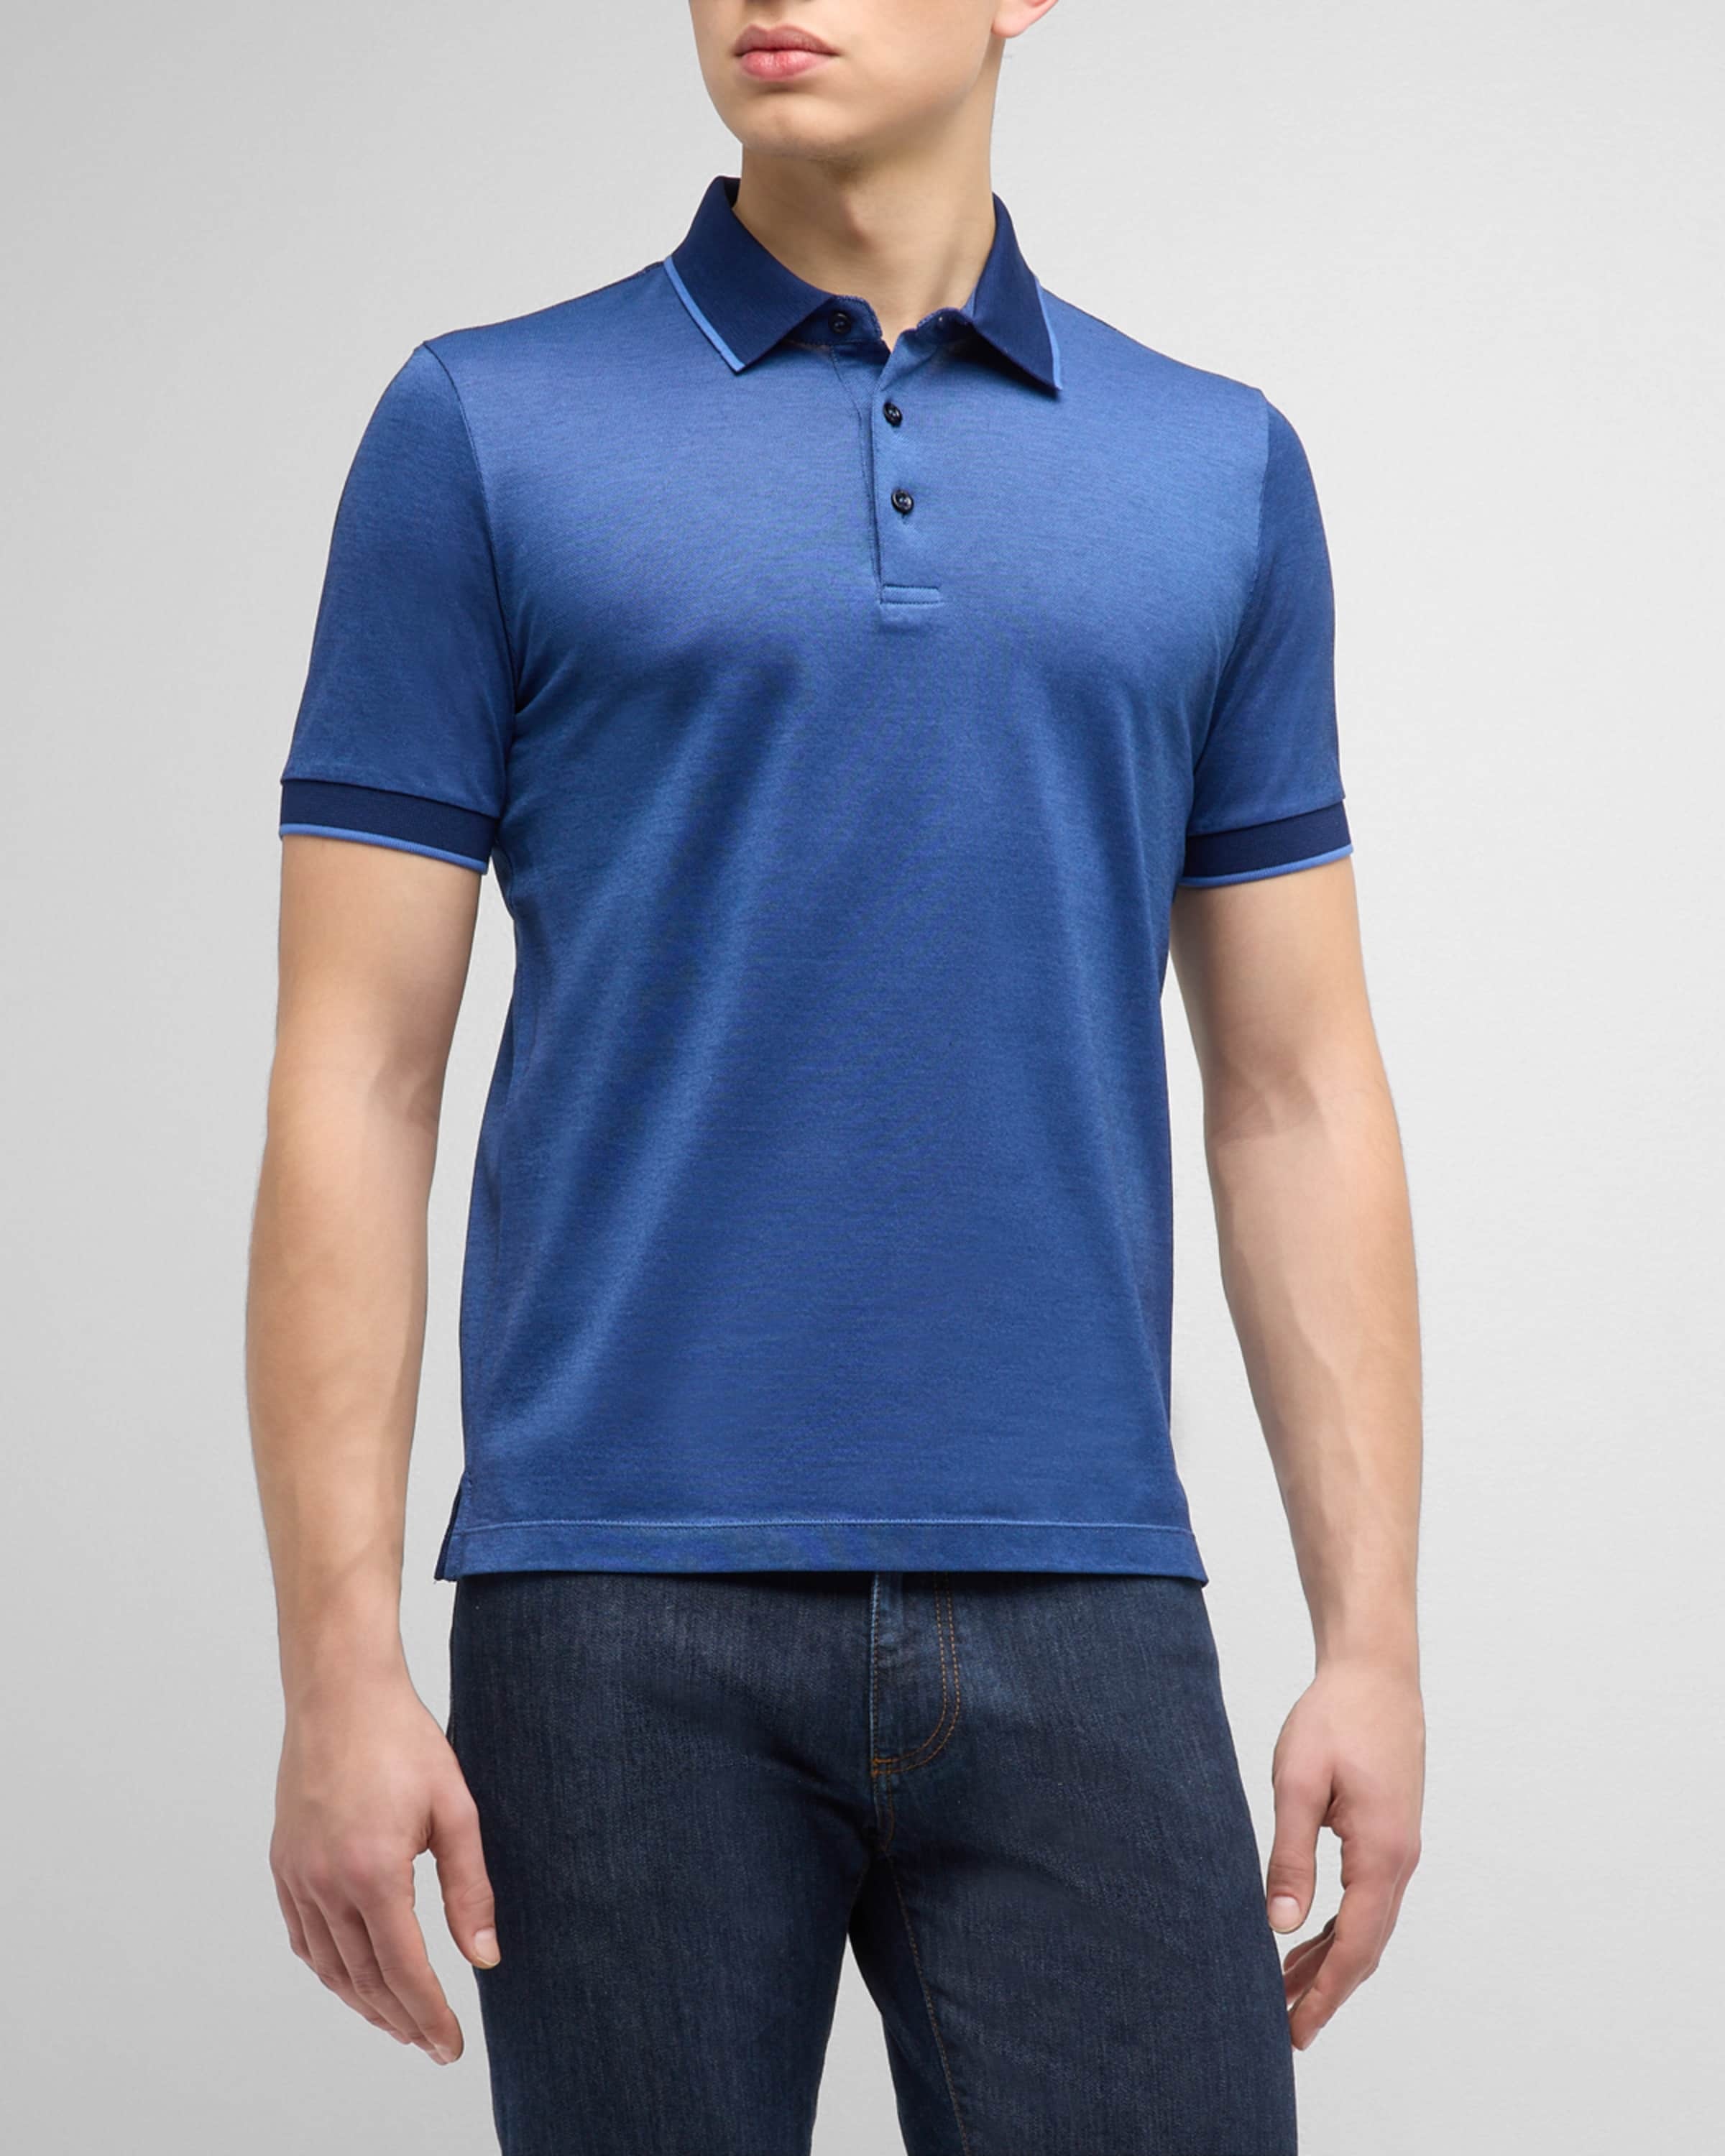 Men's Cotton Polo Shirt with Tipping - 2